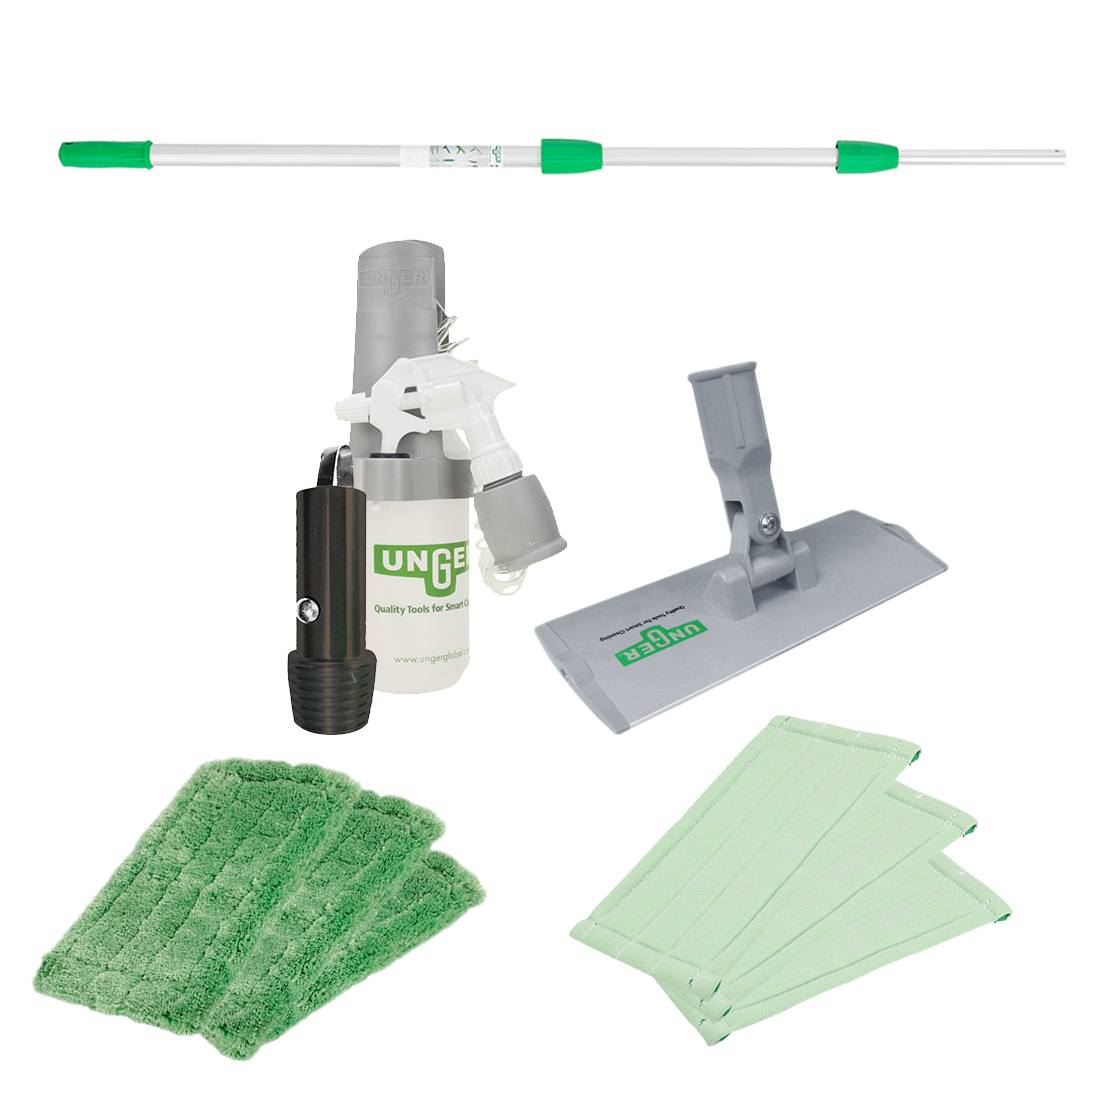 Unger SpeedClean Window Kit - Sprayer on a Belt, Pad Holder, Washing Pads, Cleaning Pads, 3-Section Pole - Square Kit View